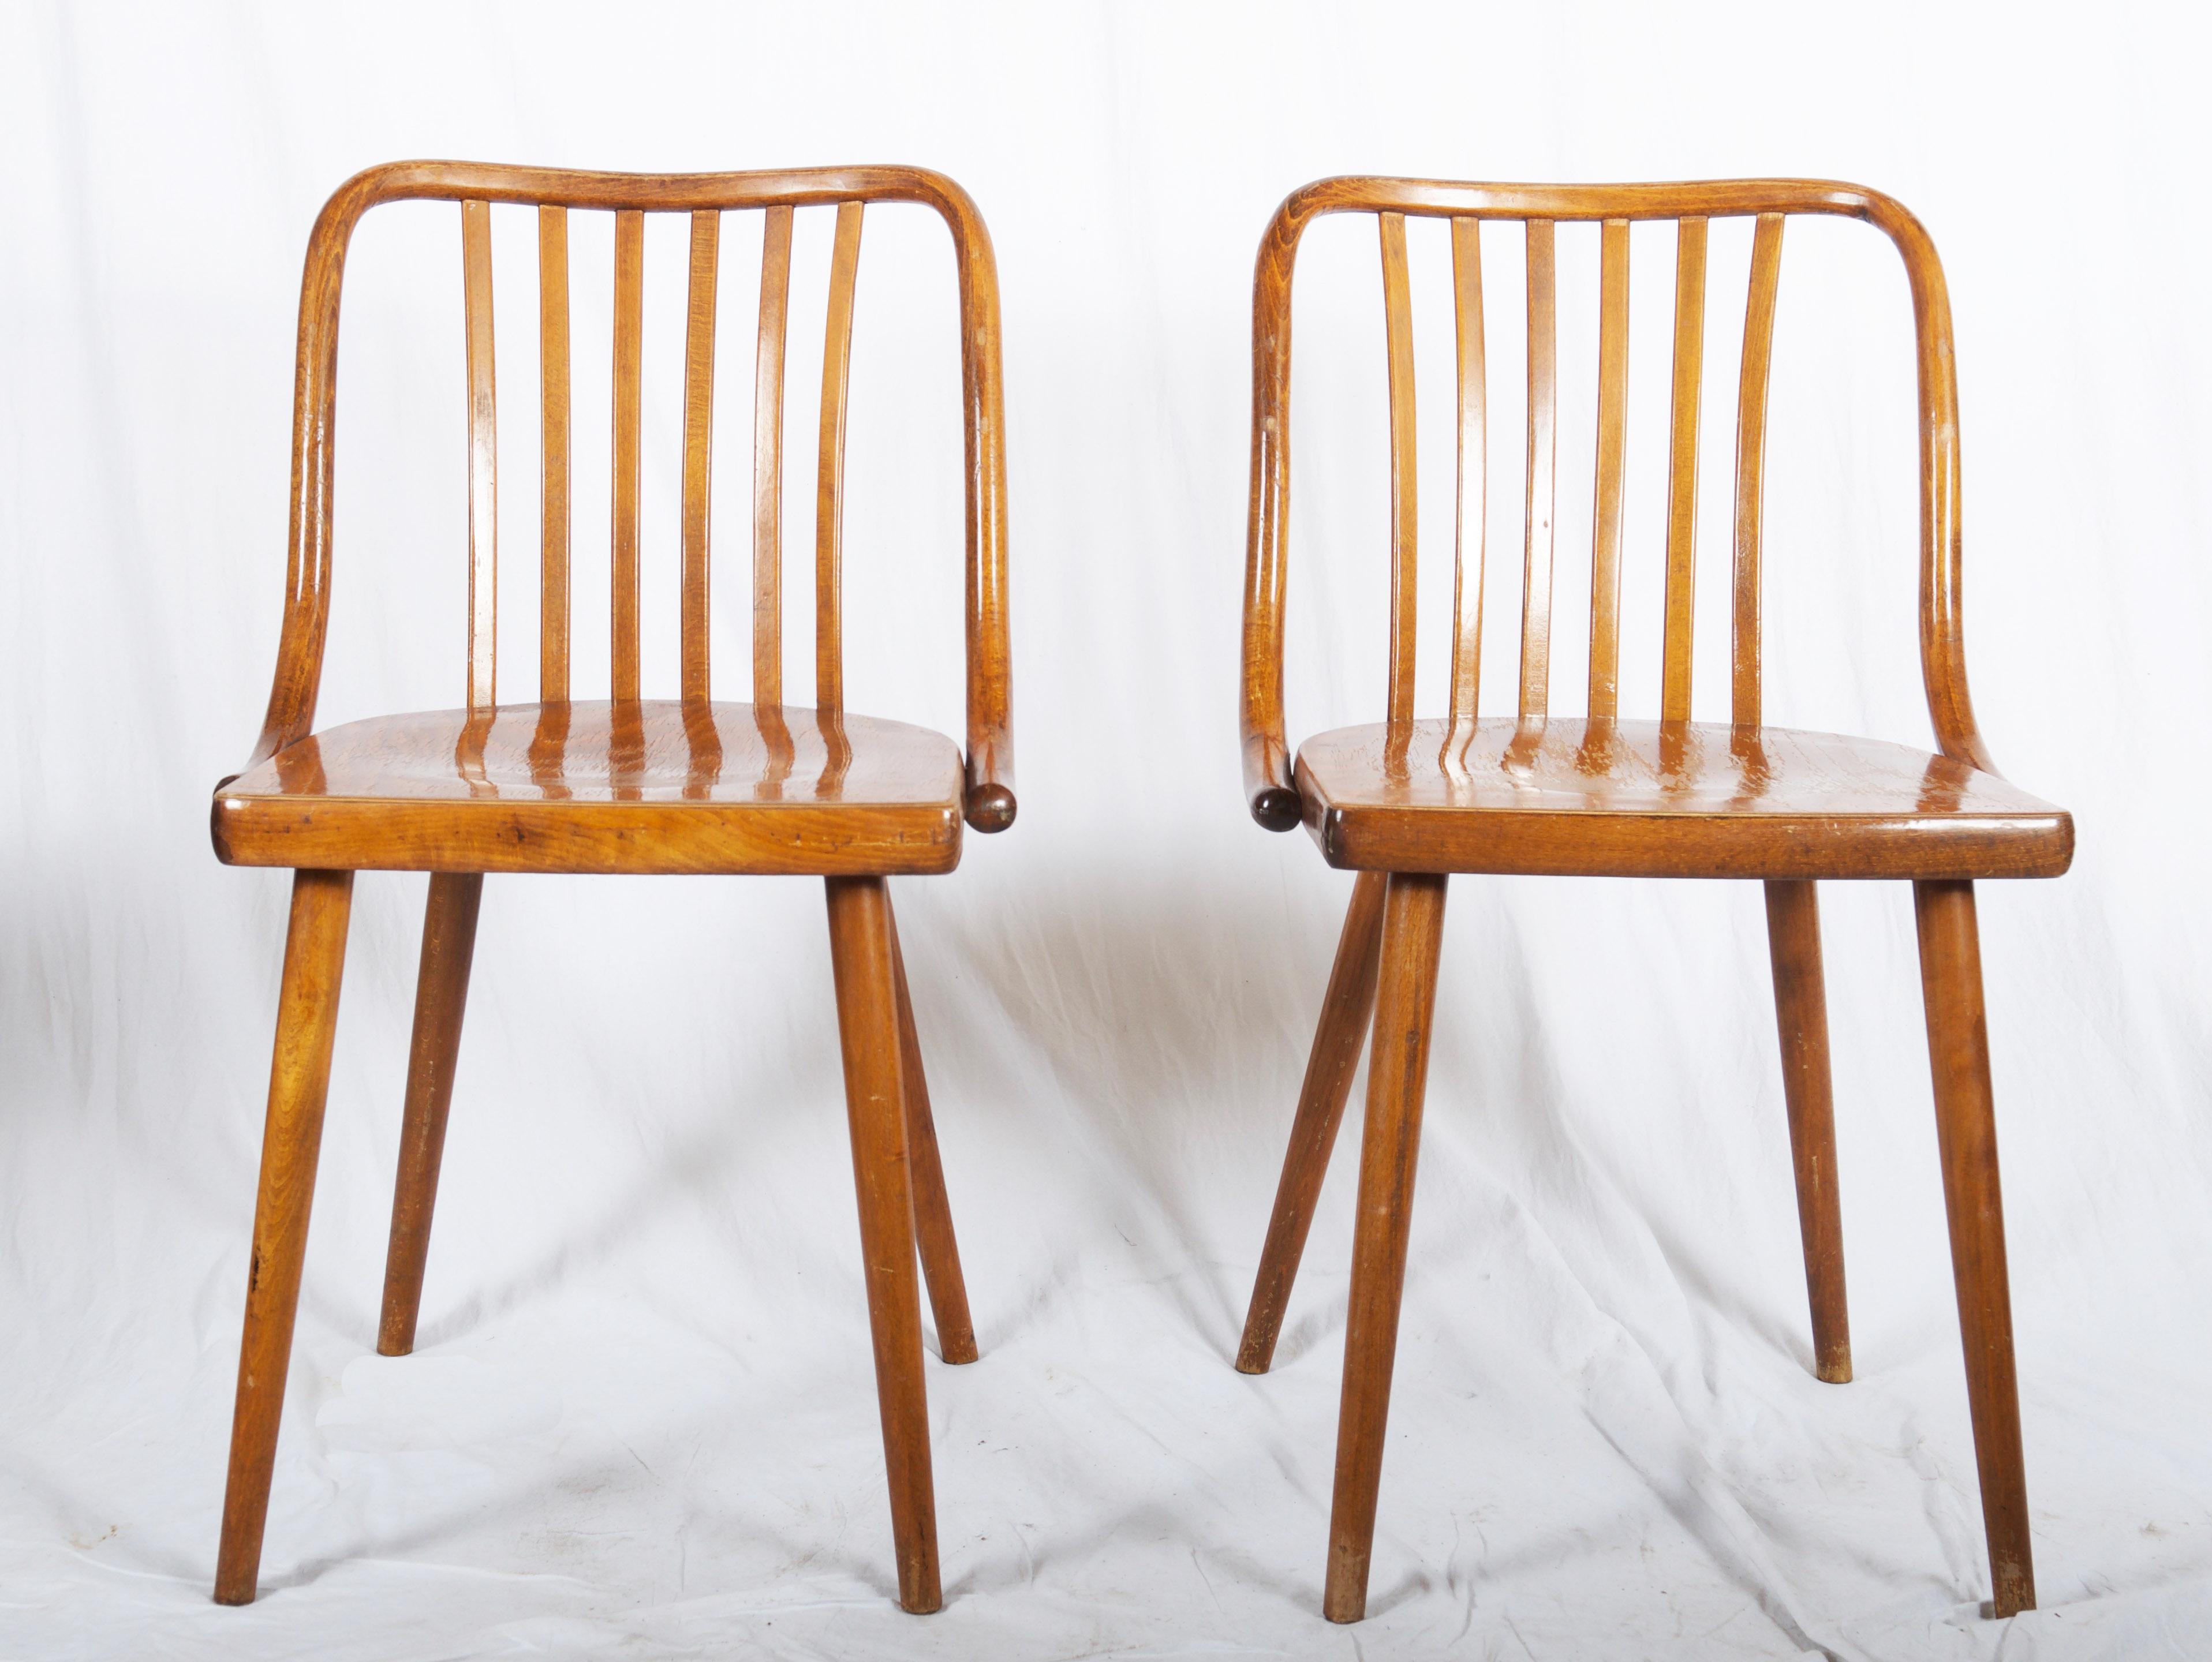 Beech bentwood plywood seat designed in the 1960s by Antonin Suman for TON (former Thonet).
Used but still very good condition. Up to 4 pieces available, additional ones on request.

 